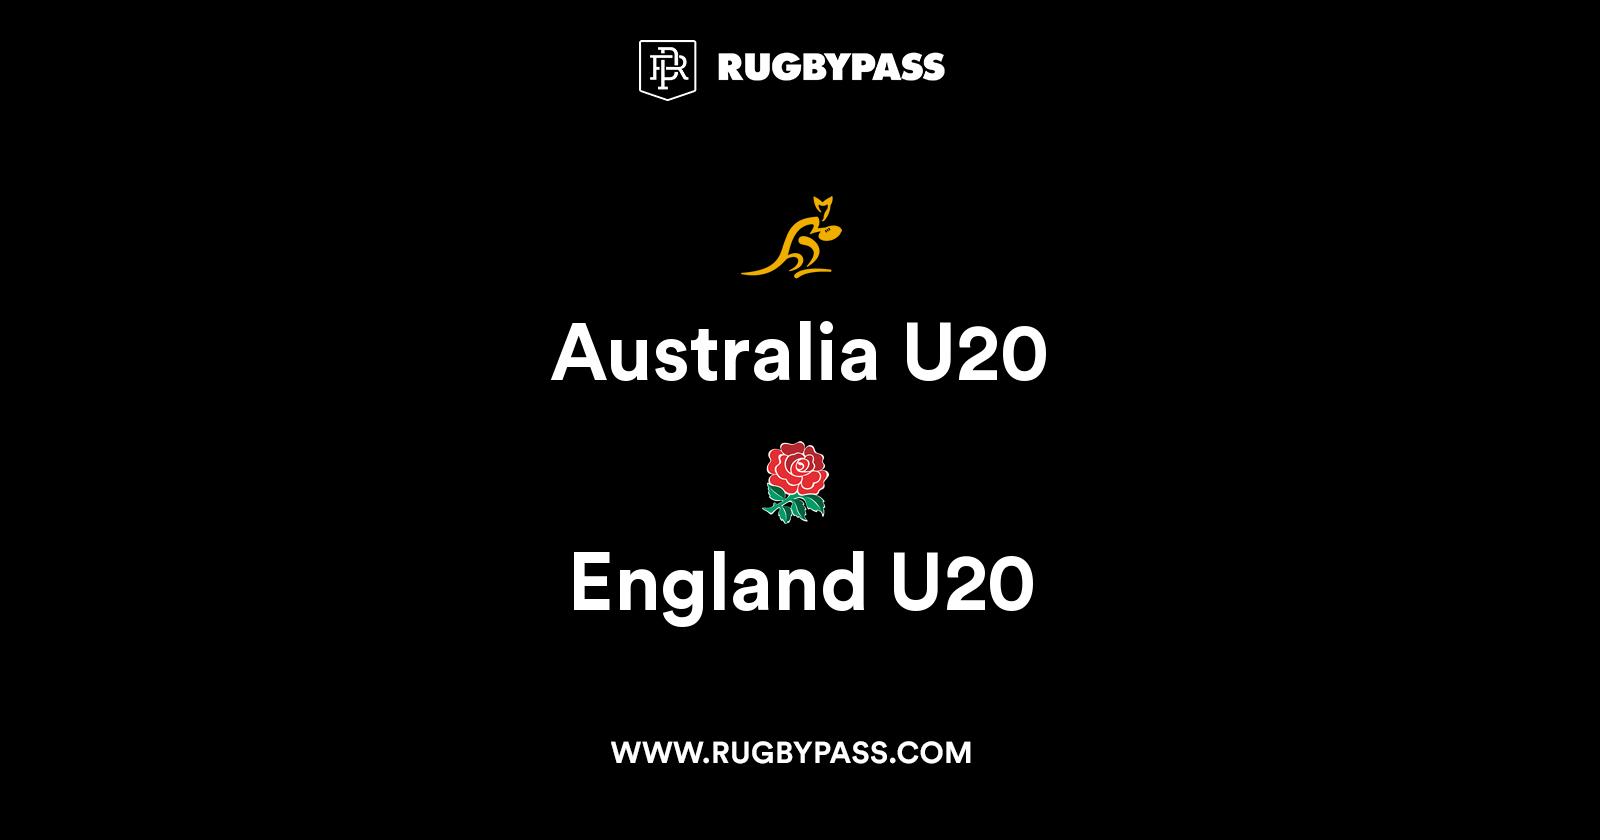 Australia U20 vs England U20 Live and Latest Rugby Union Scores and Results RugbyPass